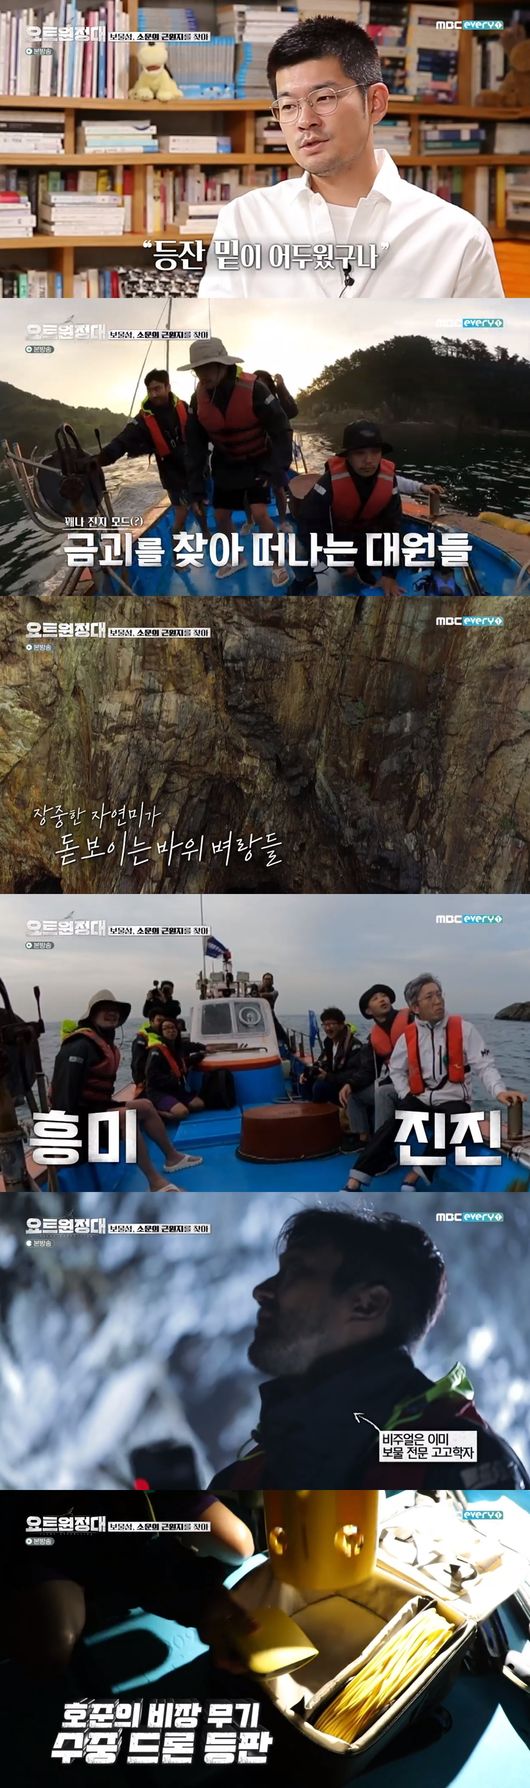 Jin Goo, Chang Kiha, Choi Siwon and Song Ho-joon have also started to explore Treasure.In MBC Everlon Yot Expedition broadcast on the 19th, Jin Goo, Chang Kiha, Choi Siwon, and Song Ho-joon expedition members were shown entering Cave of Altamira in search of Treasure of Sorido.Captain Kim Seung-jin said, There is a story that Sorido is Treasure Island. There is a story that the sound has been buried somewhere while withdrawing from the Dutch East India Company era. Eventually, the expedition left for the unknown Cave of Altamira, where Treasure was hidden.As they entered the Cave of Altamira, the expeditions fell into the mystery of Cave of Altamira.I think Ive somehow hidden Treasure between Cave of Altamira, Choi Siwon said.So Song Ho-joon put the Underwater environment drone into the sea.When the drone hits the bottom of the sea, youll see the ocean, said Song Ho-joon, whose Underwater environment drones have gradually gone down.But it was too rich to be seen easily. Then the director jumped into the sea and started filming.Chang Kiha said, We did not find Treasure, but we found Treasure in the shooting industry. Lee Jung Jun.: MBC Everlon Yot Expedition broadcast capture